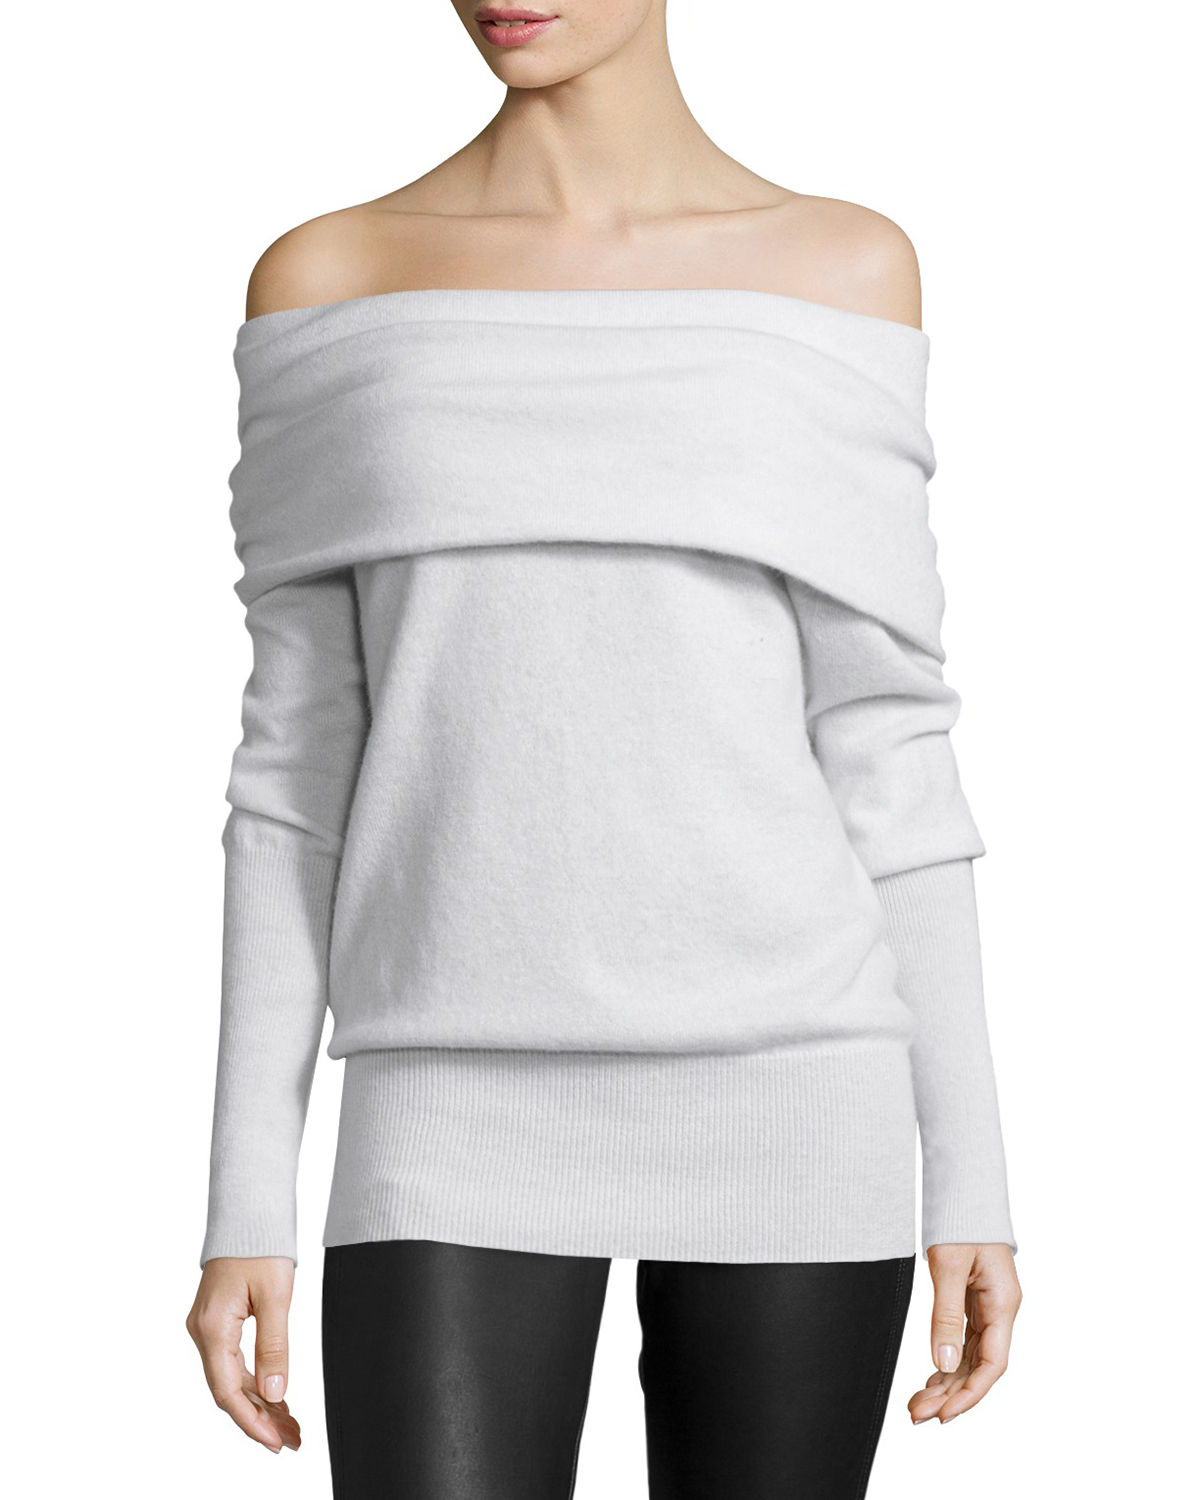 Lyst - Autumn Cashmere Off-the-shoulder Slouchy Cashmere Sweater in Gray